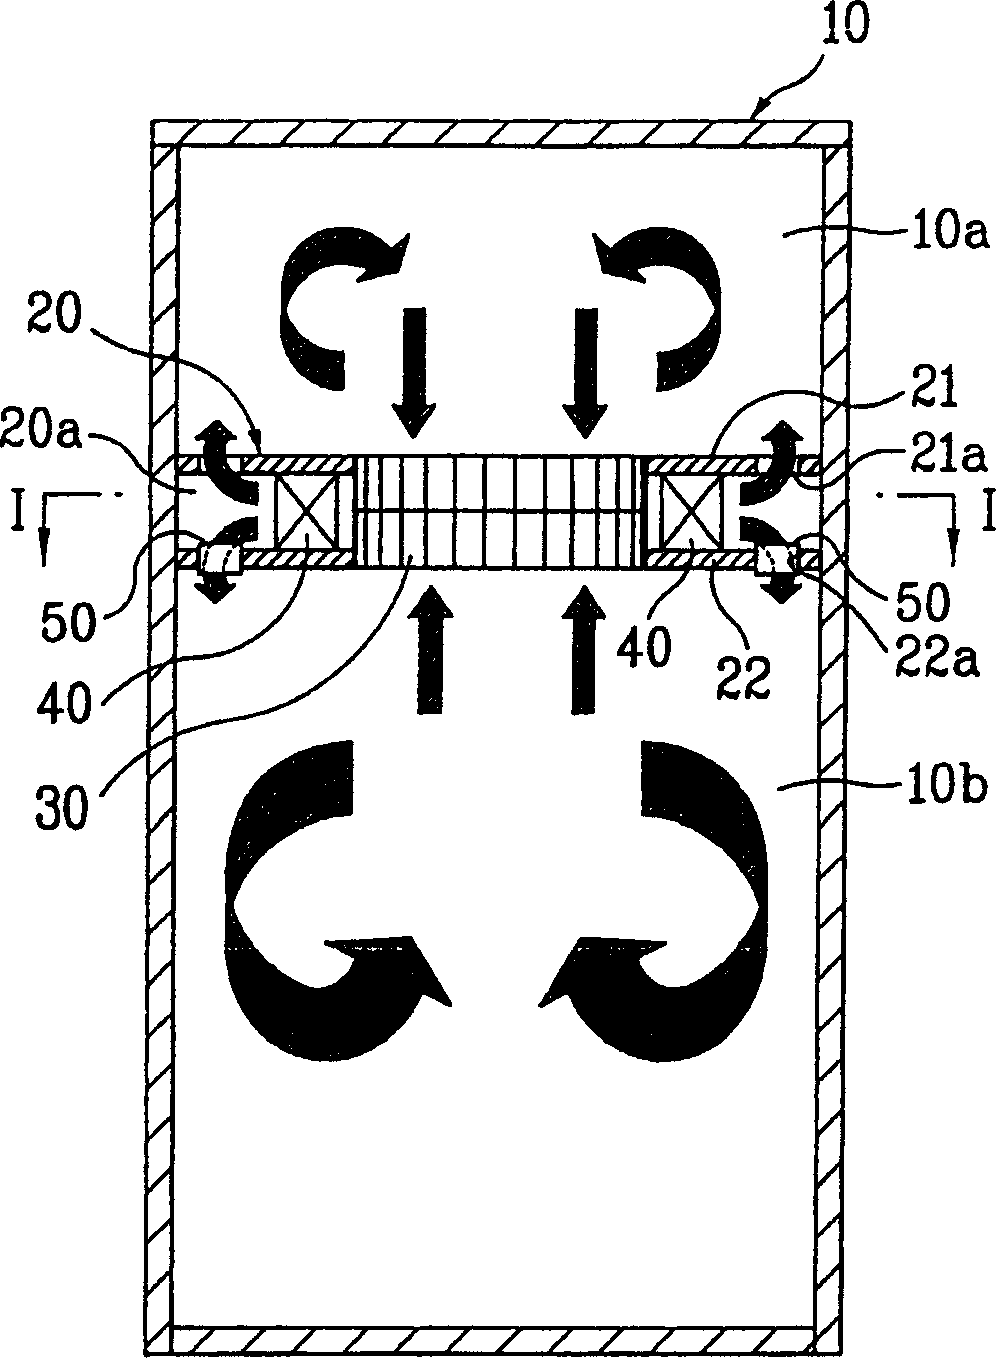 Refrigerator using double-suction centrifugal fan